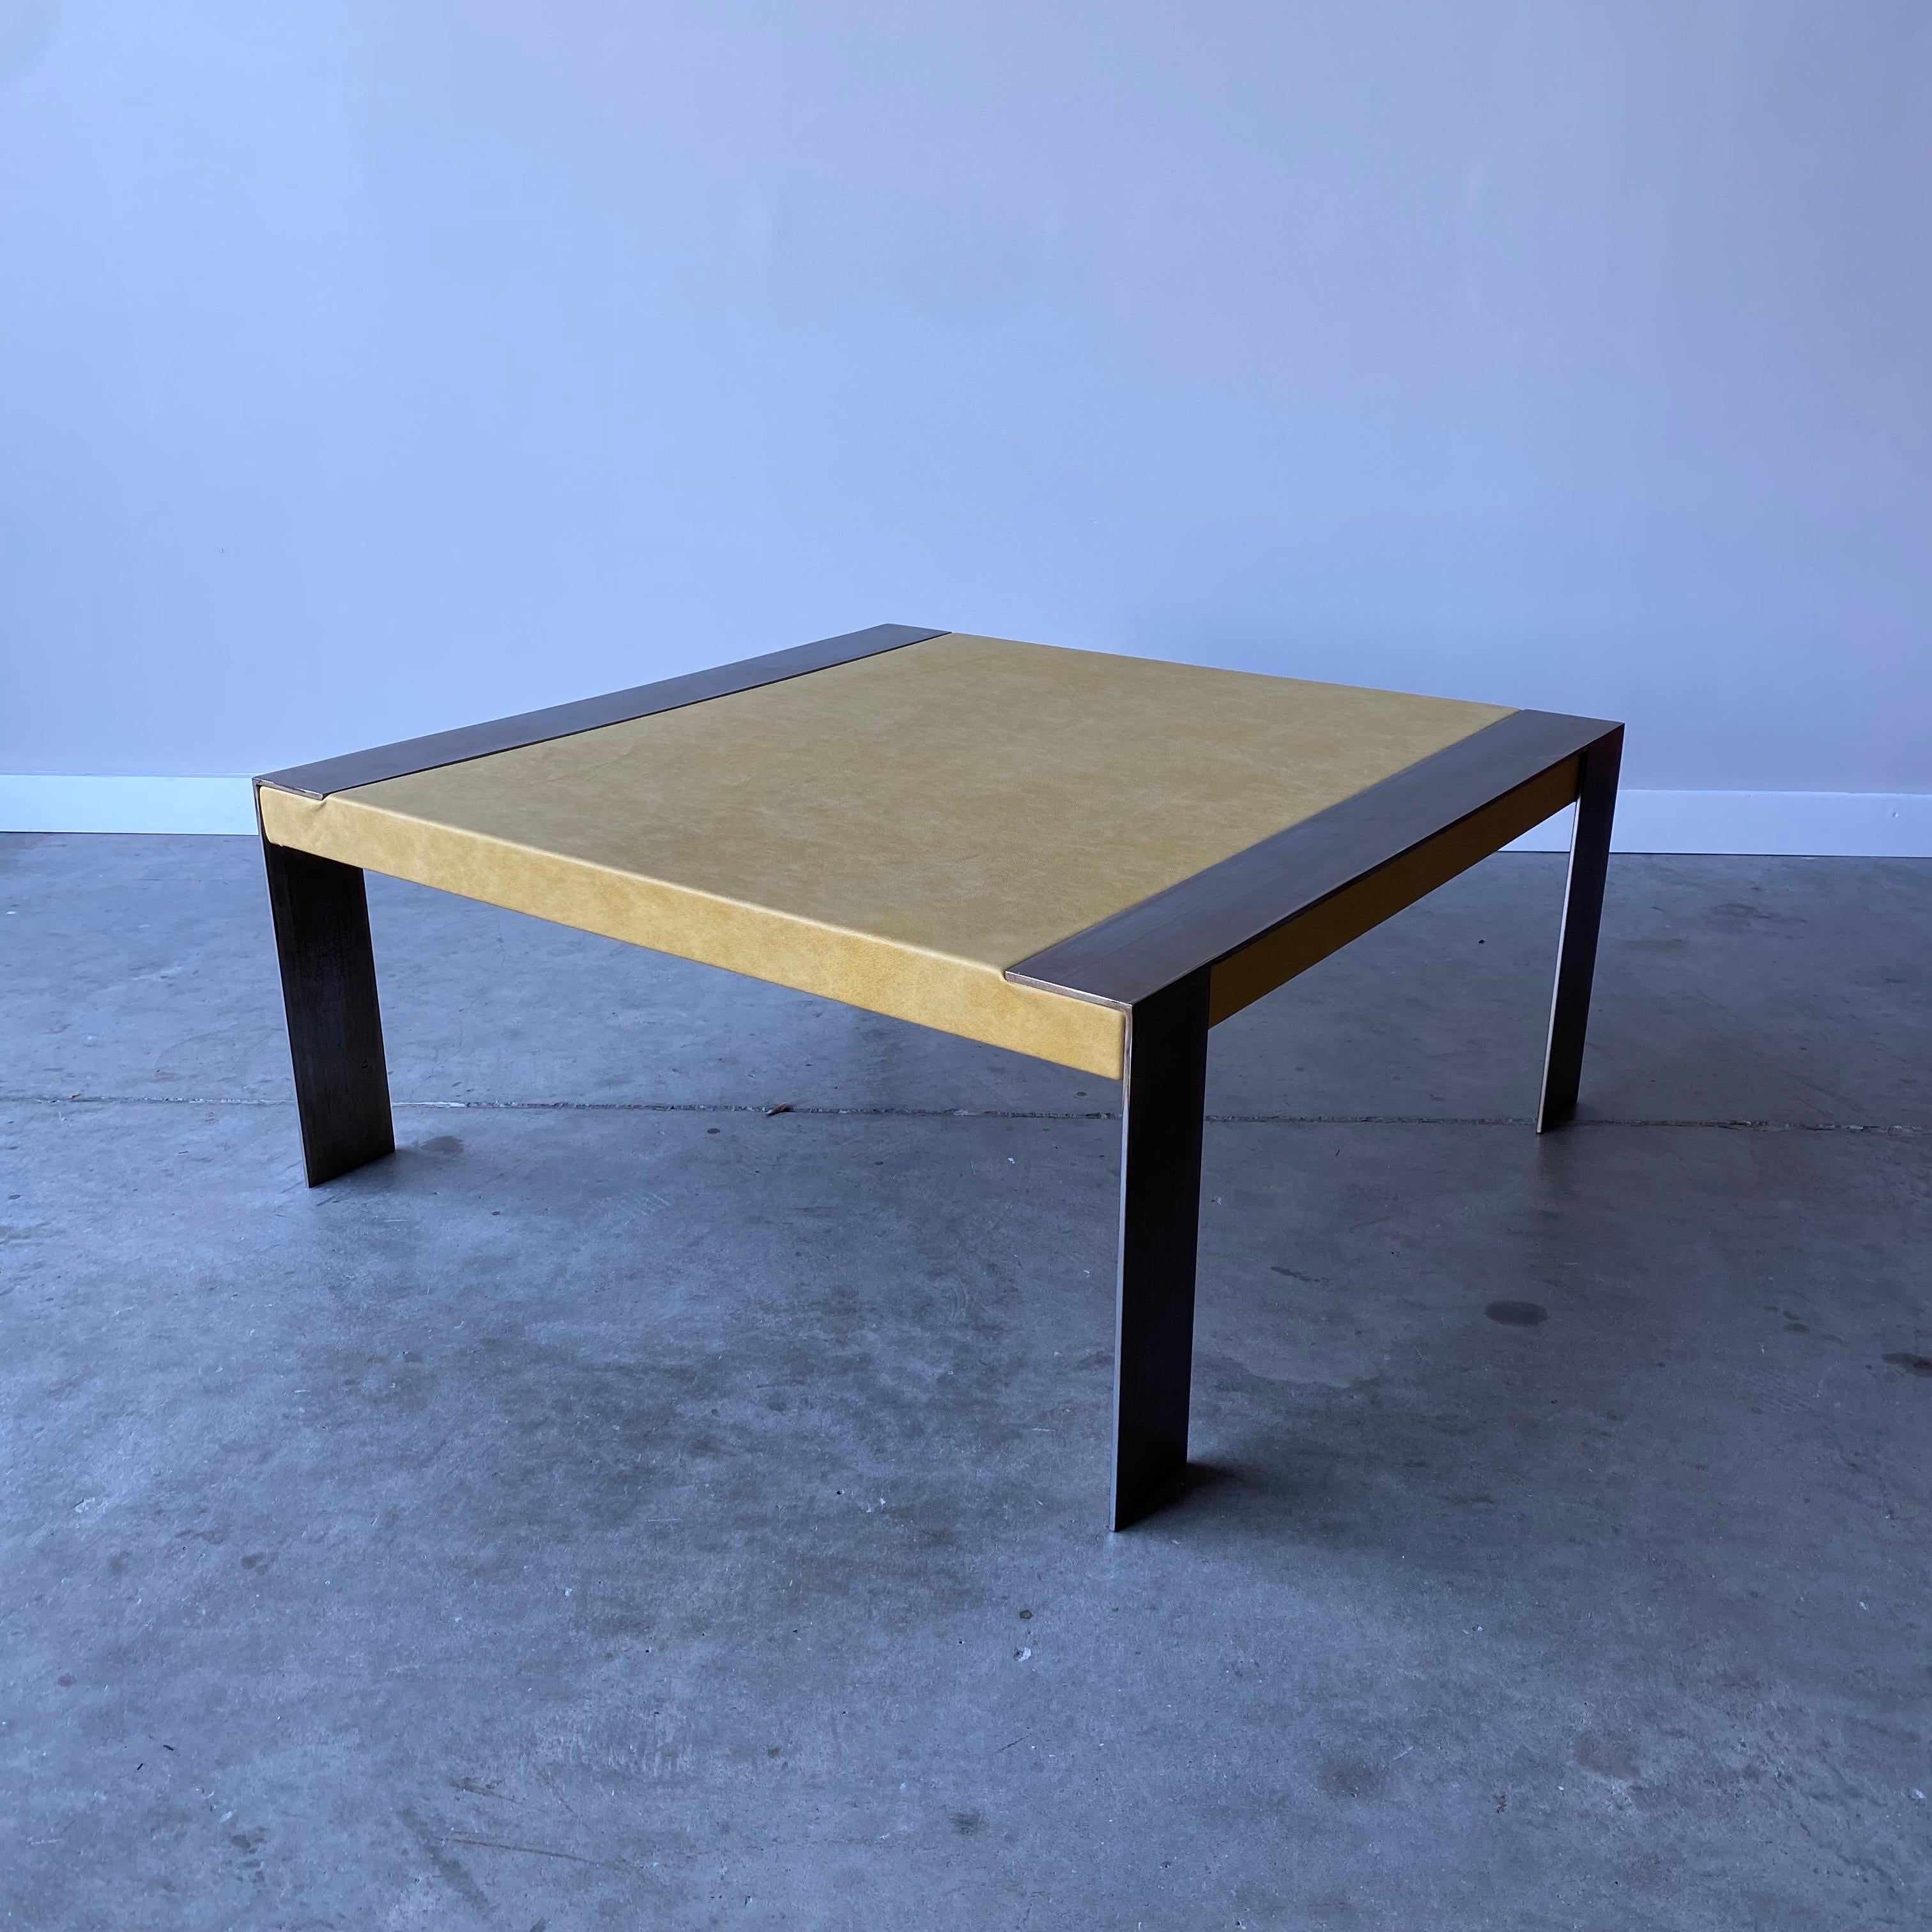 A unique leather topped coffee table with patinated steel legs.  Sleek and industrial with a great combination of materials.